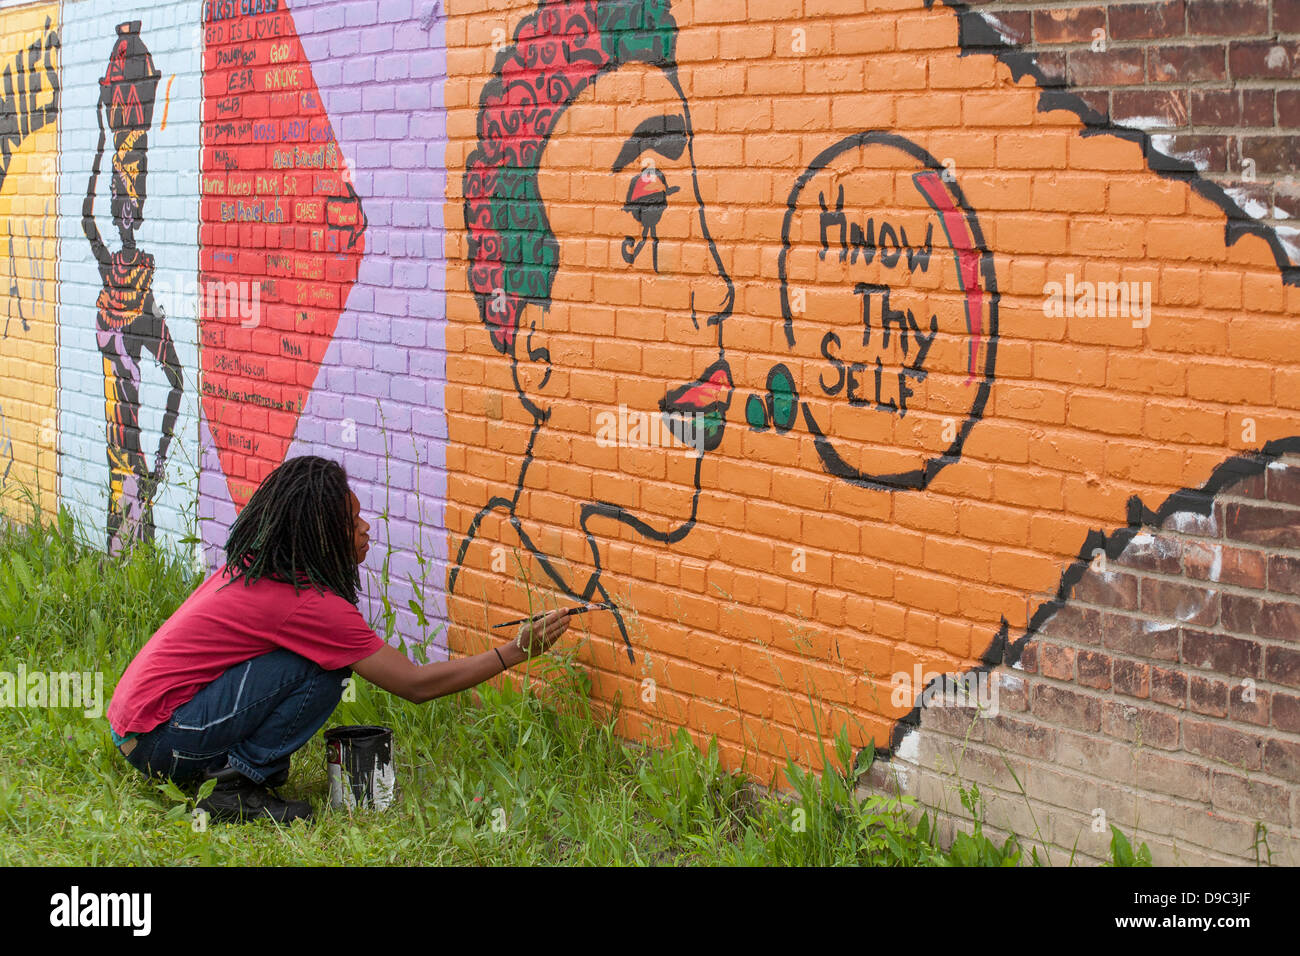 Detroit, Michigan - Volunteers paint a the wall of a grocery store. Stock Photo